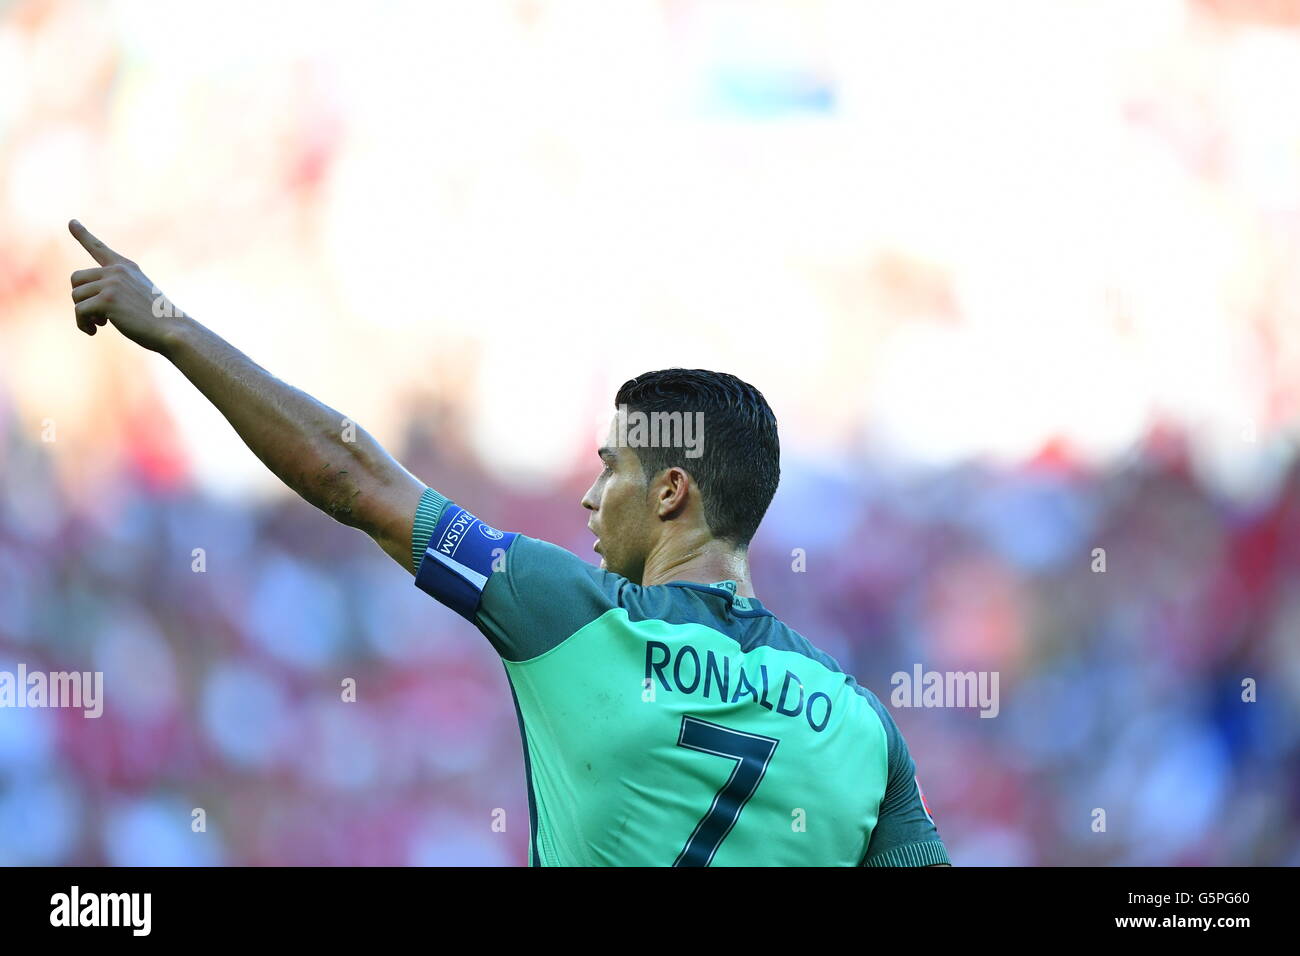 Lyon, France. 22nd June, 2016. Portugal's Cristiano Ronaldo reacts during the UEFA Euro 2016 Group F soccer match between Hungary and Portugal at the Stade de Lyon in Lyon, France, 22 June 2016. Photo: Uwe Anspach/dpa/Alamy Live News Stock Photo